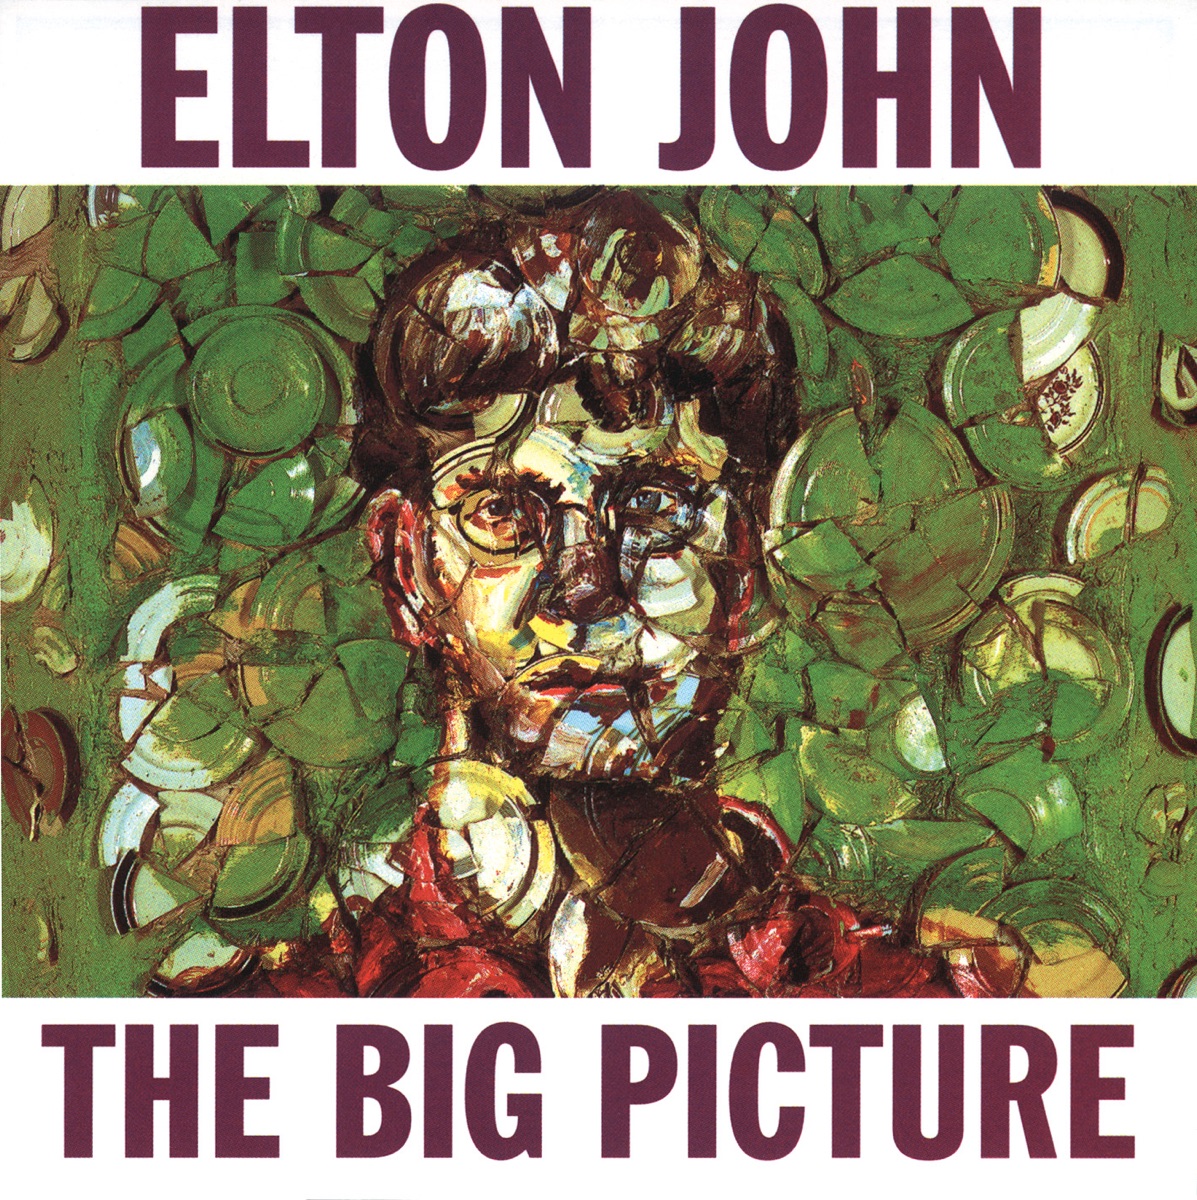 Songs from the West Coast (Expanded Edition) by Elton John on Apple Music